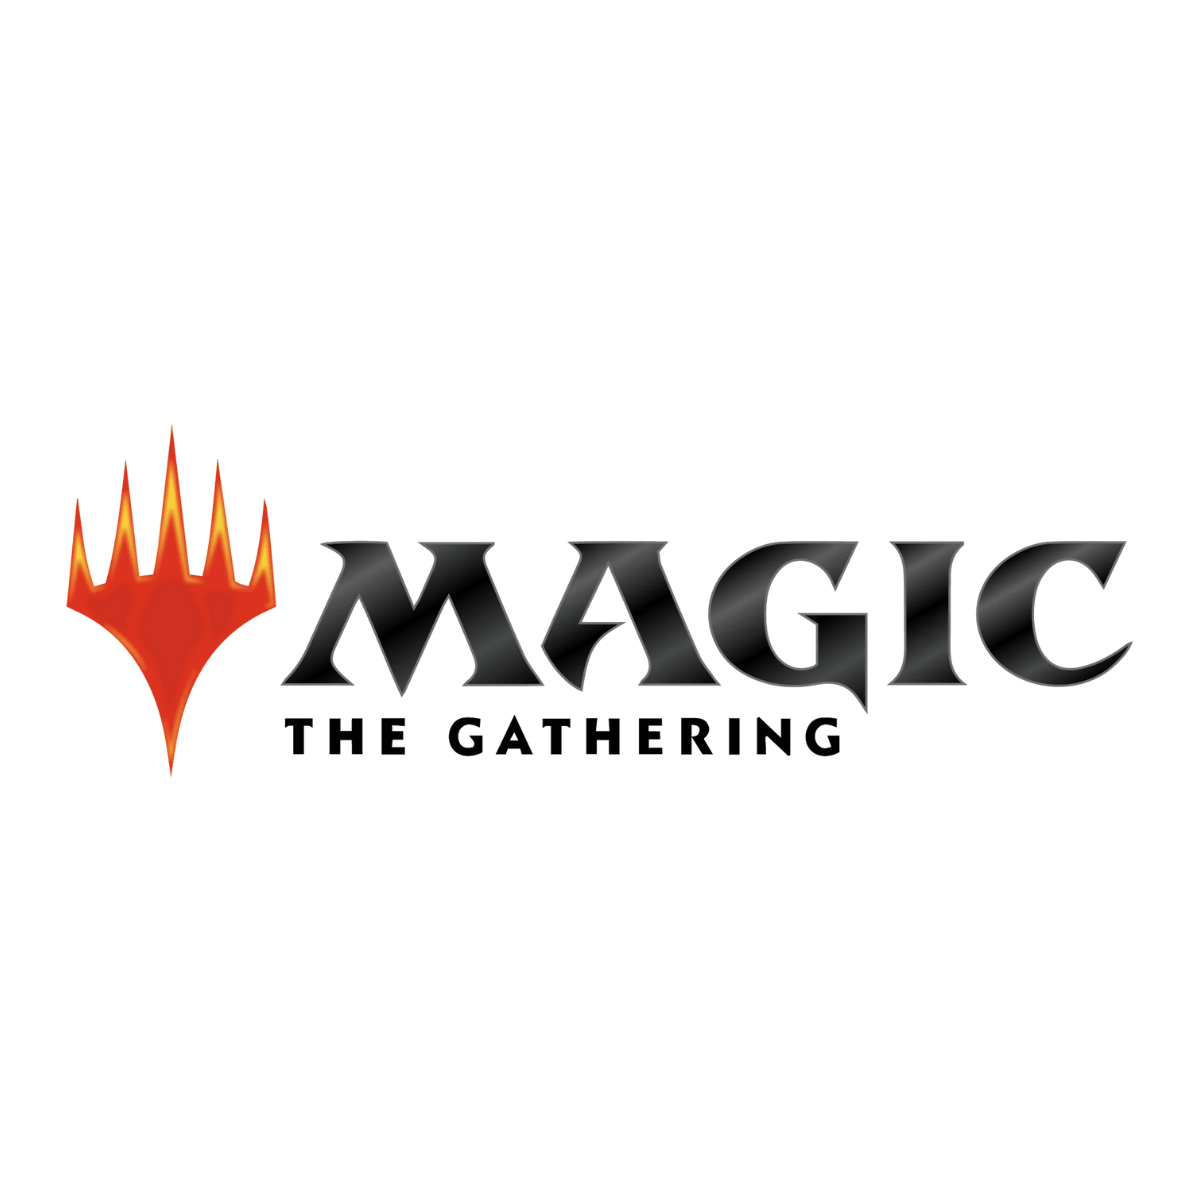 Magic: The Gathering Character Sleeve Collection [MTGS-231] "Dominaria United - Vodalian Hexcatcher"-Ensky-Ace Cards & Collectibles